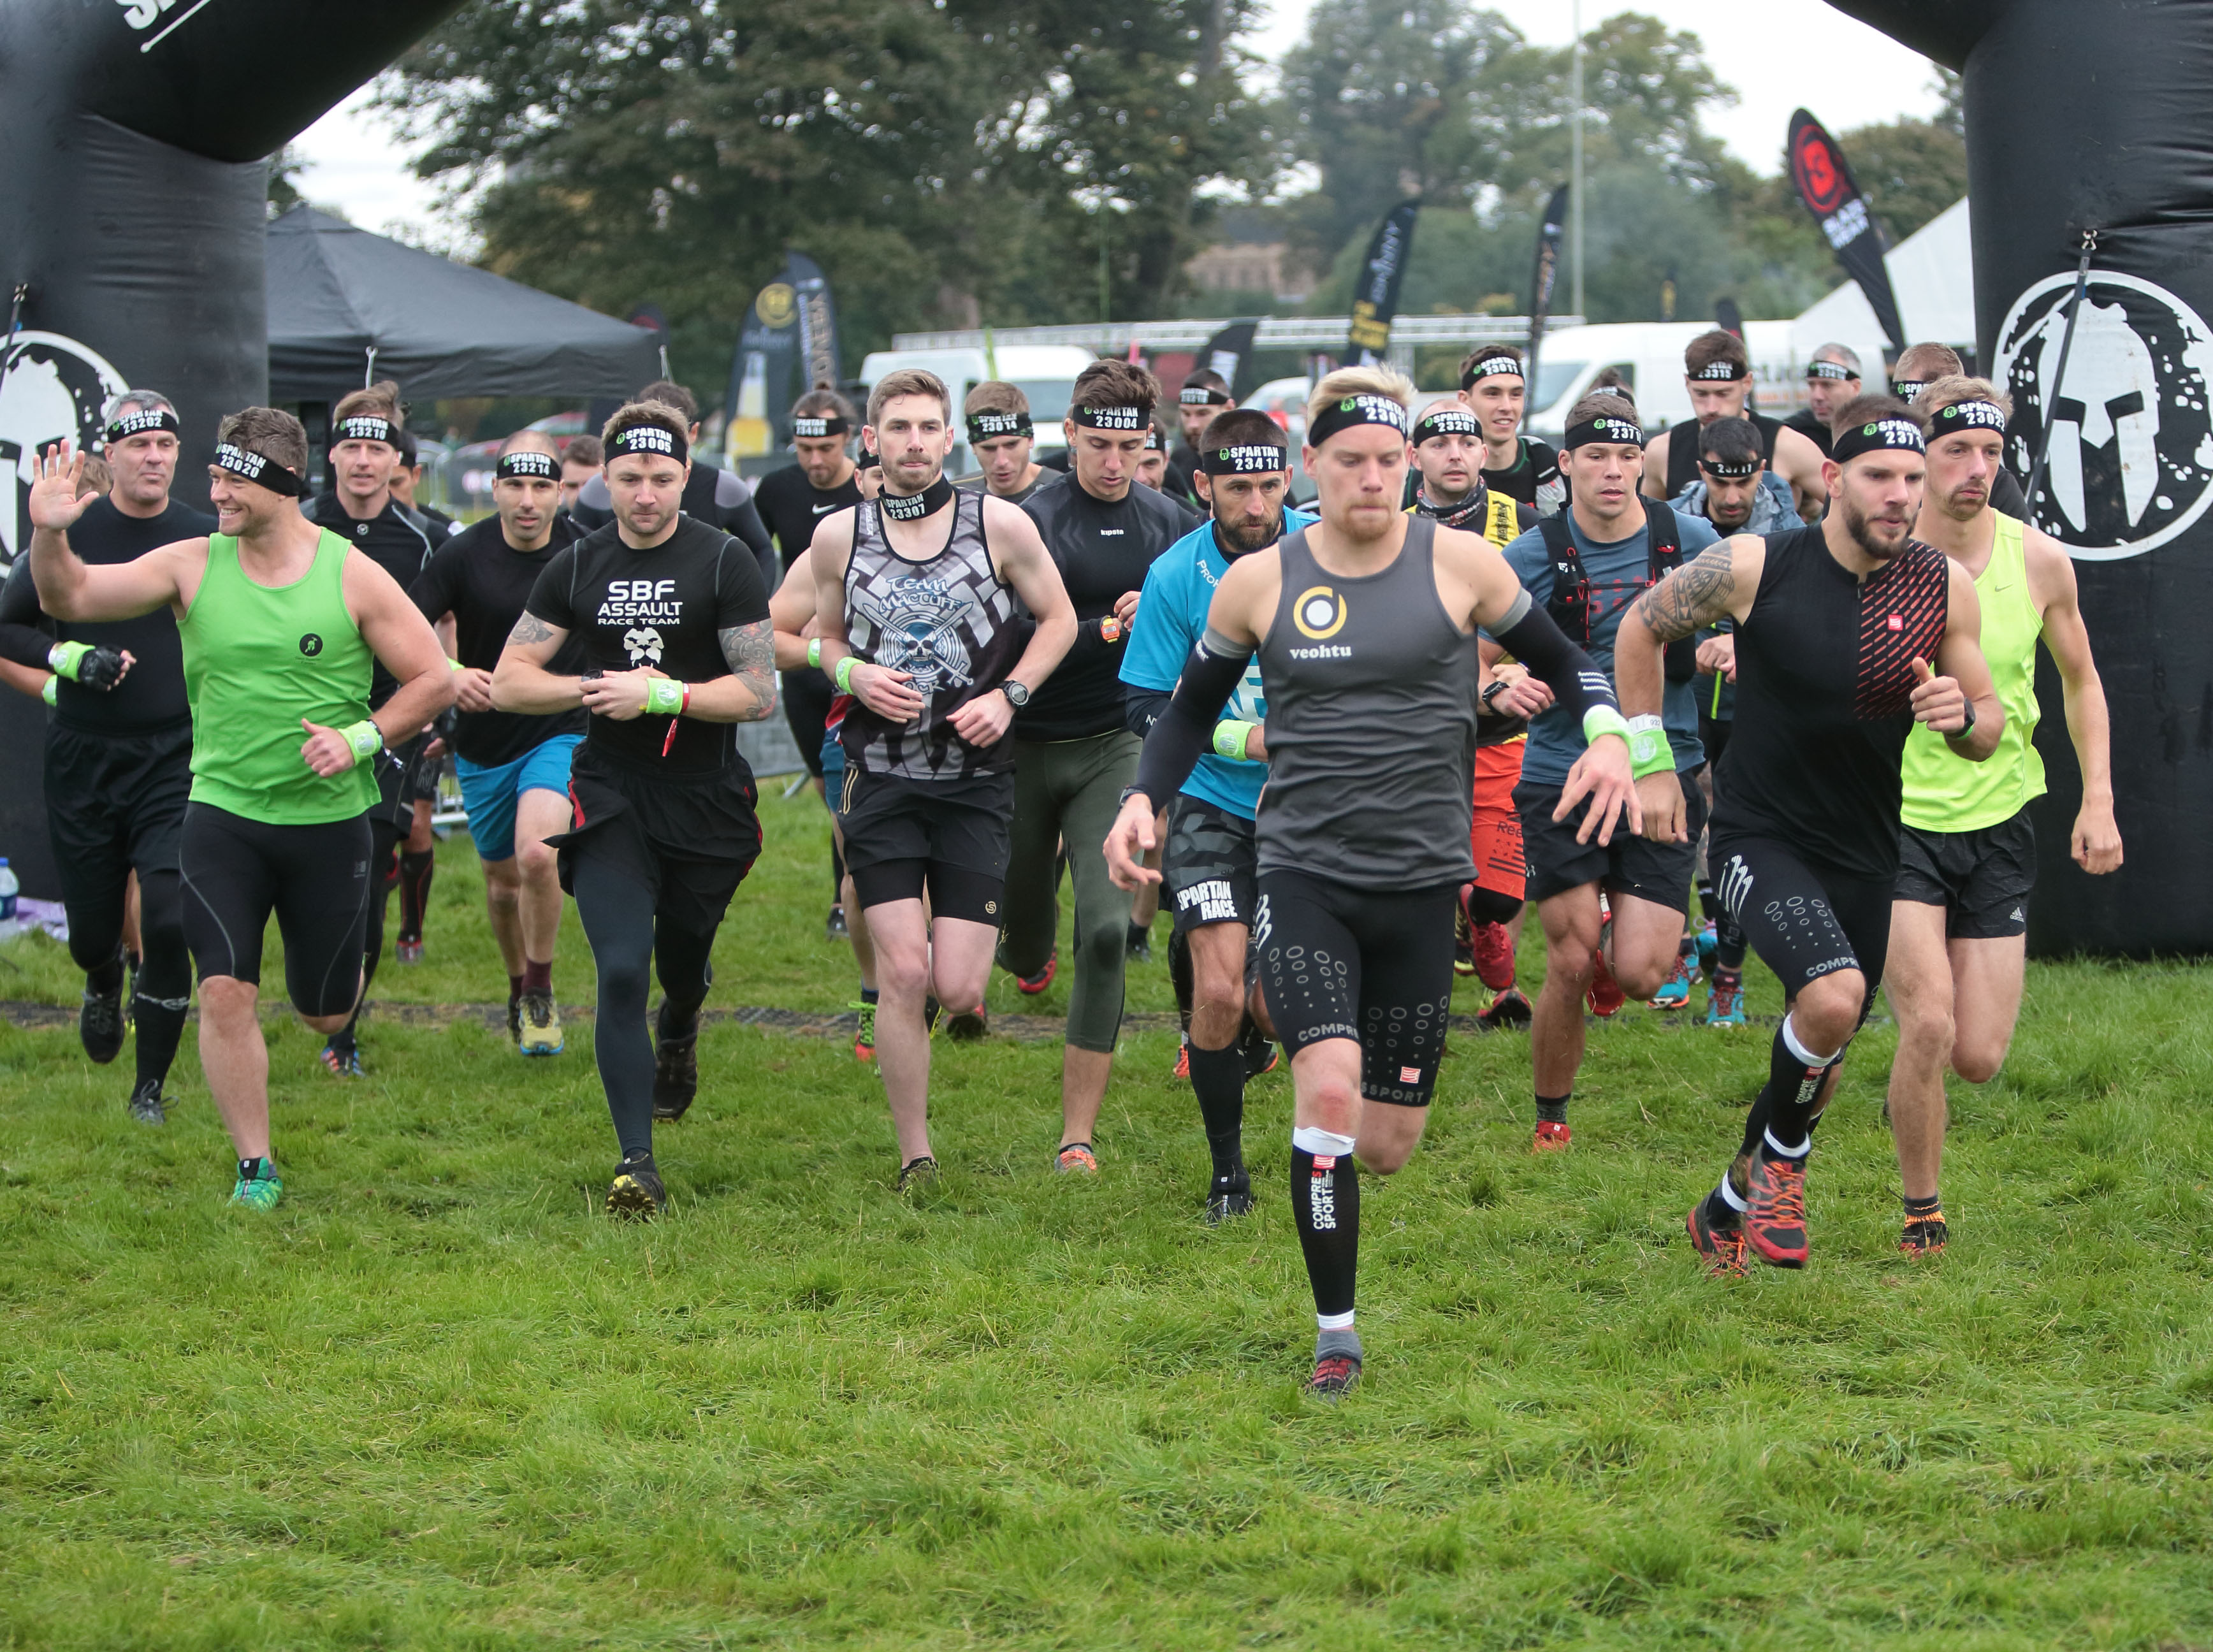 The elite event starts at the 2018 Spartan Race.